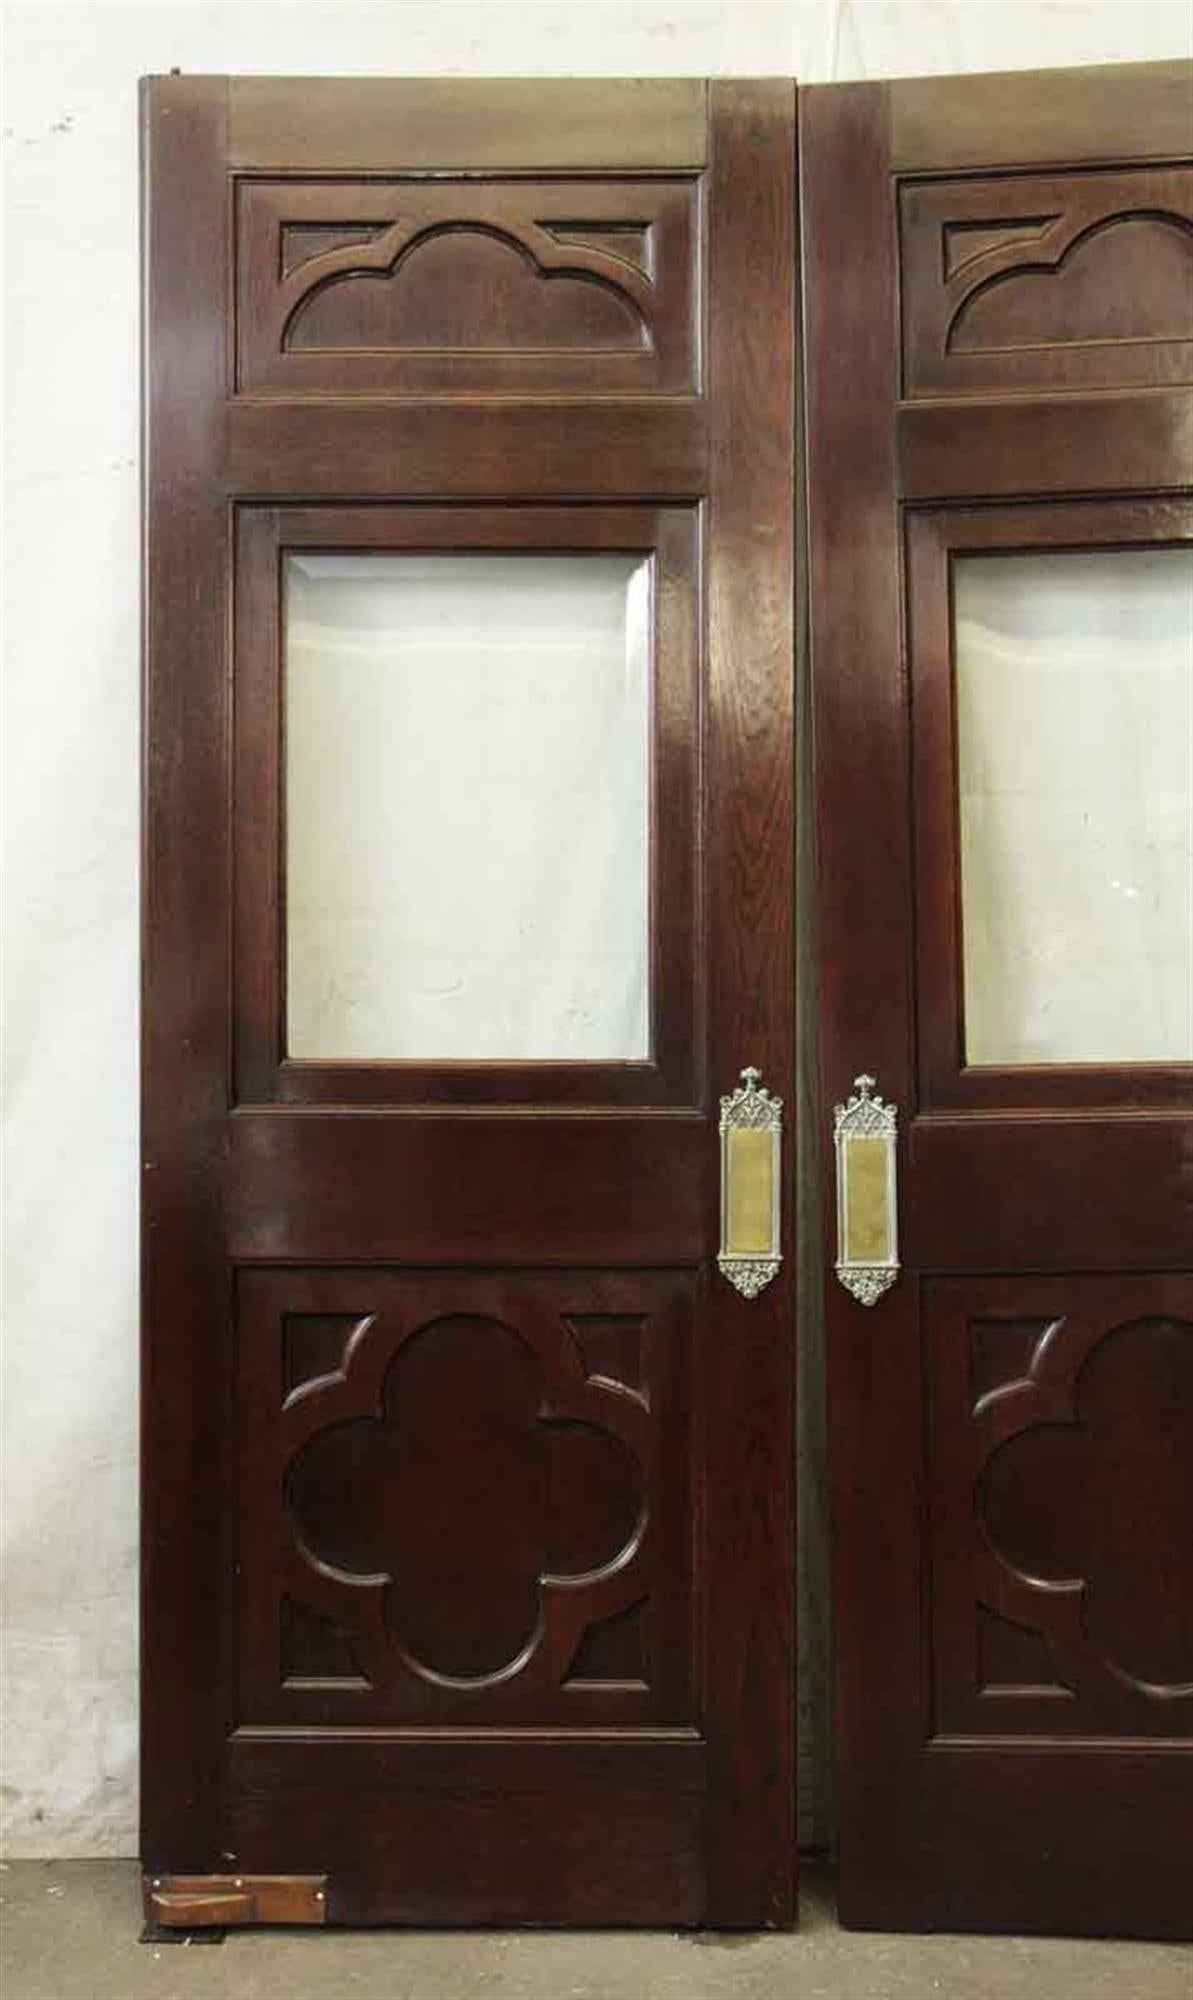 From the 1910s clover burled doors with beveled glass and solid brass hardware. Sold as a pair. These can be seen at our 400 Gilligan St location in Scranton, PA.